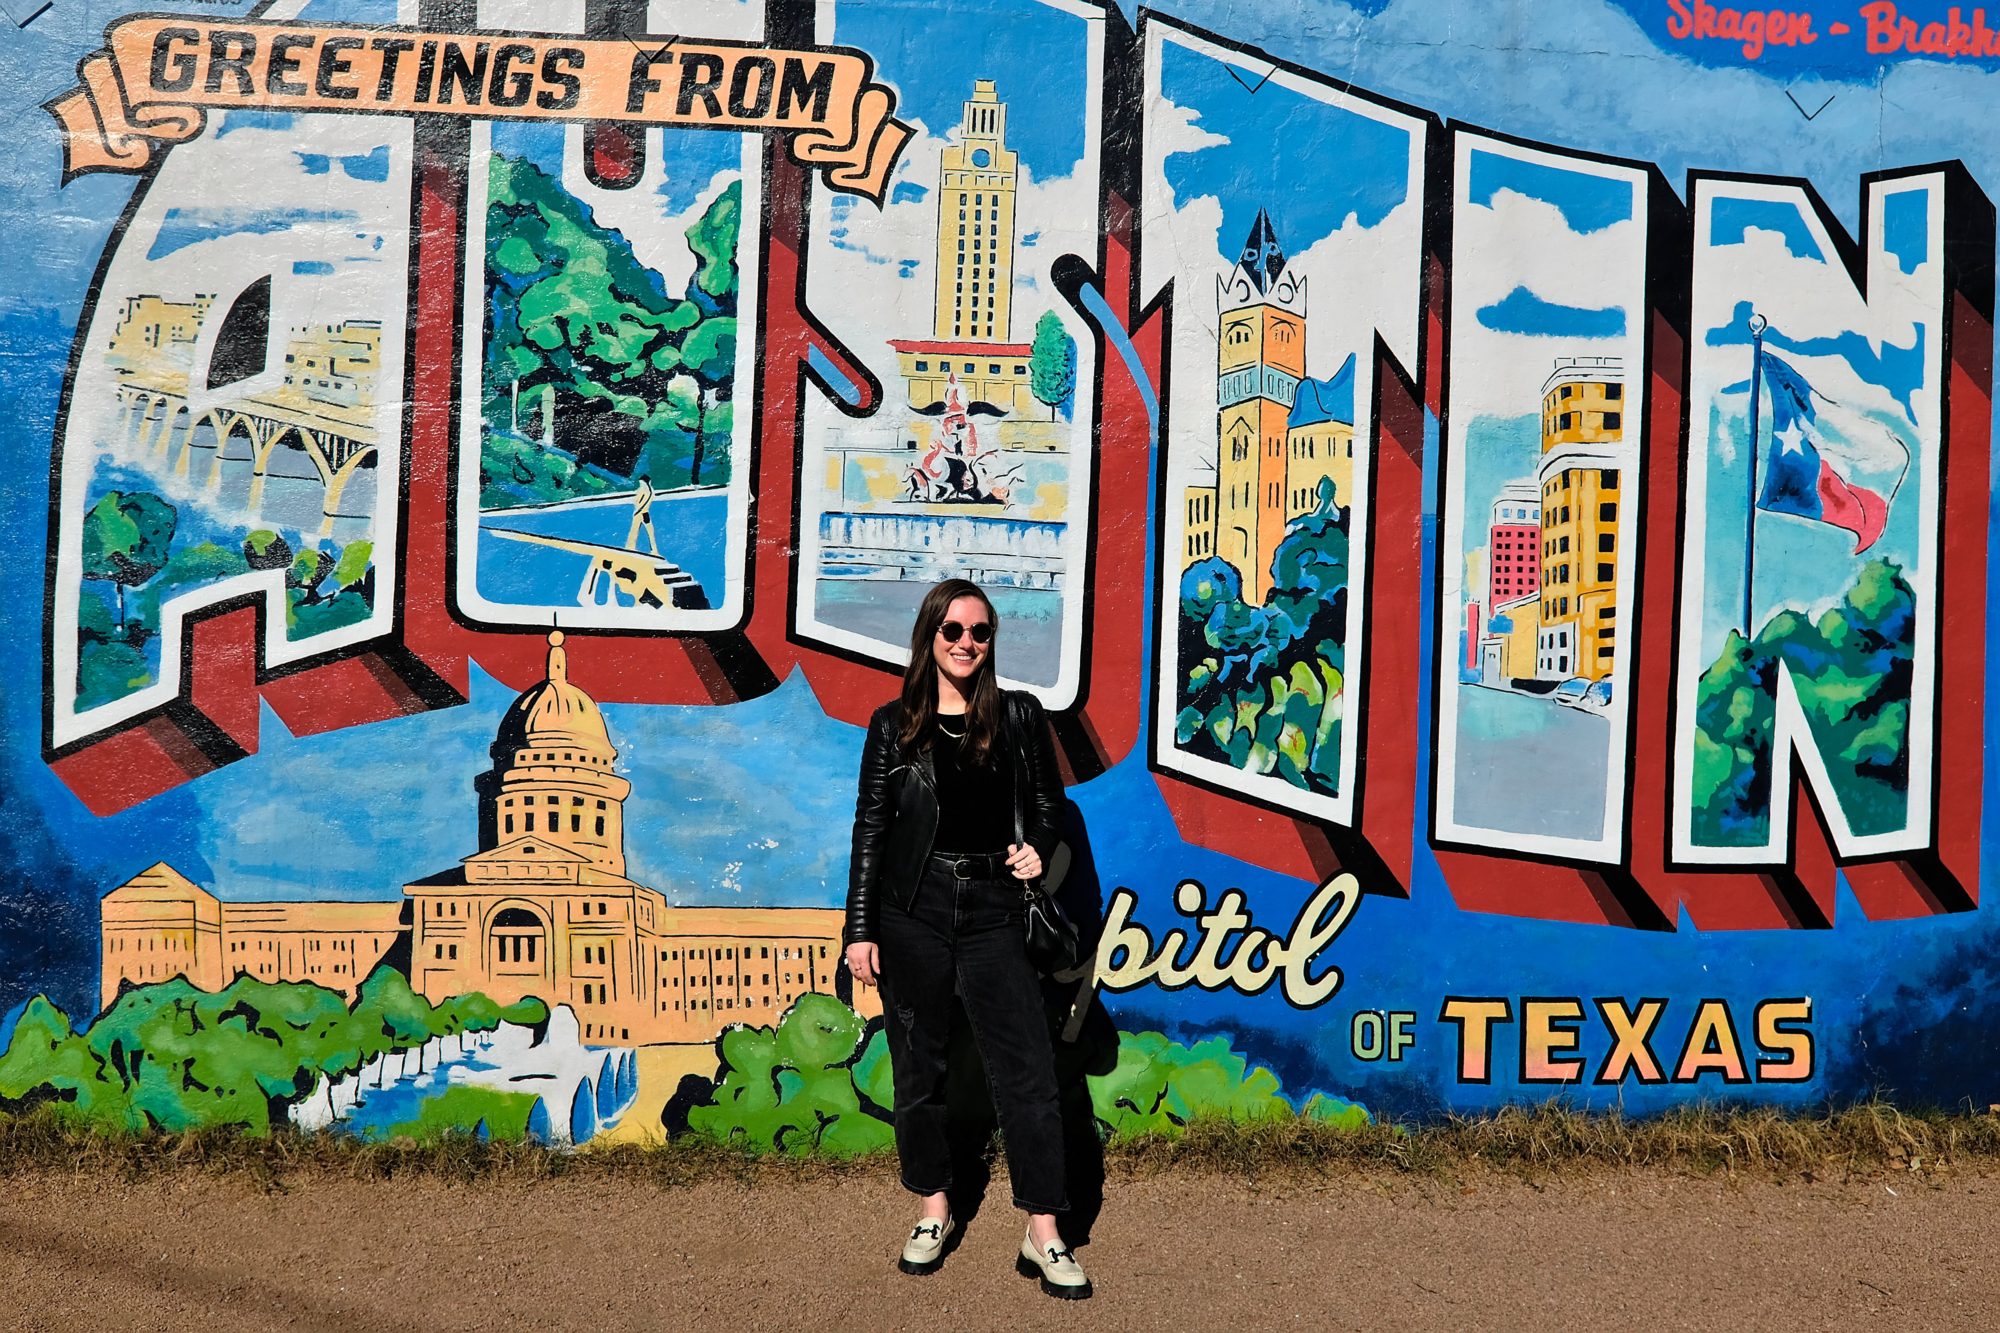 Alyssa stands in front of the Greetings from Austin Mural and it is very bright outside